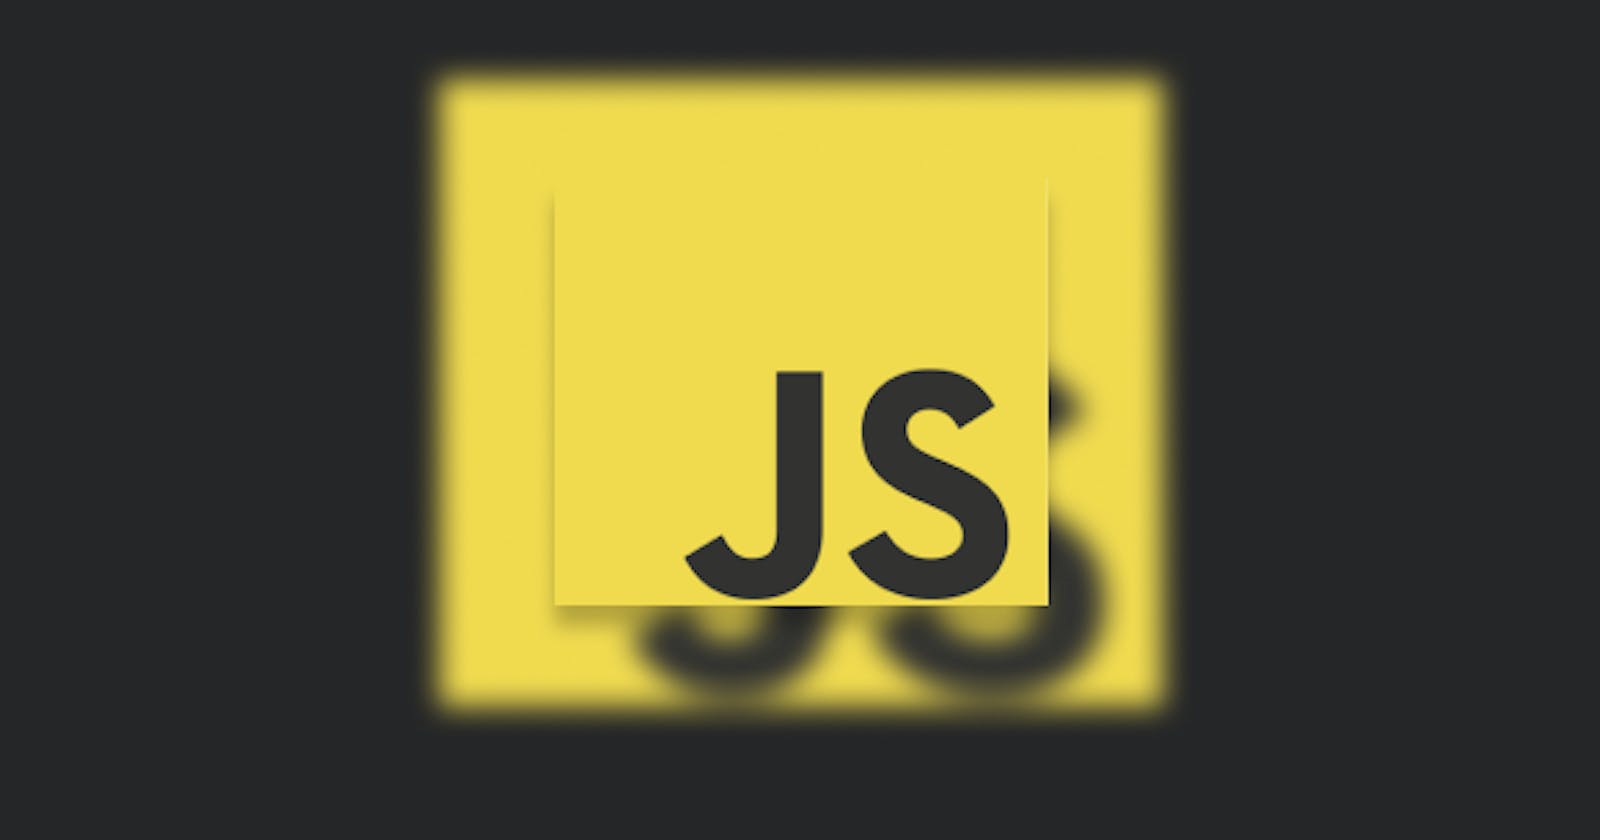 What type of language is JavaScript?